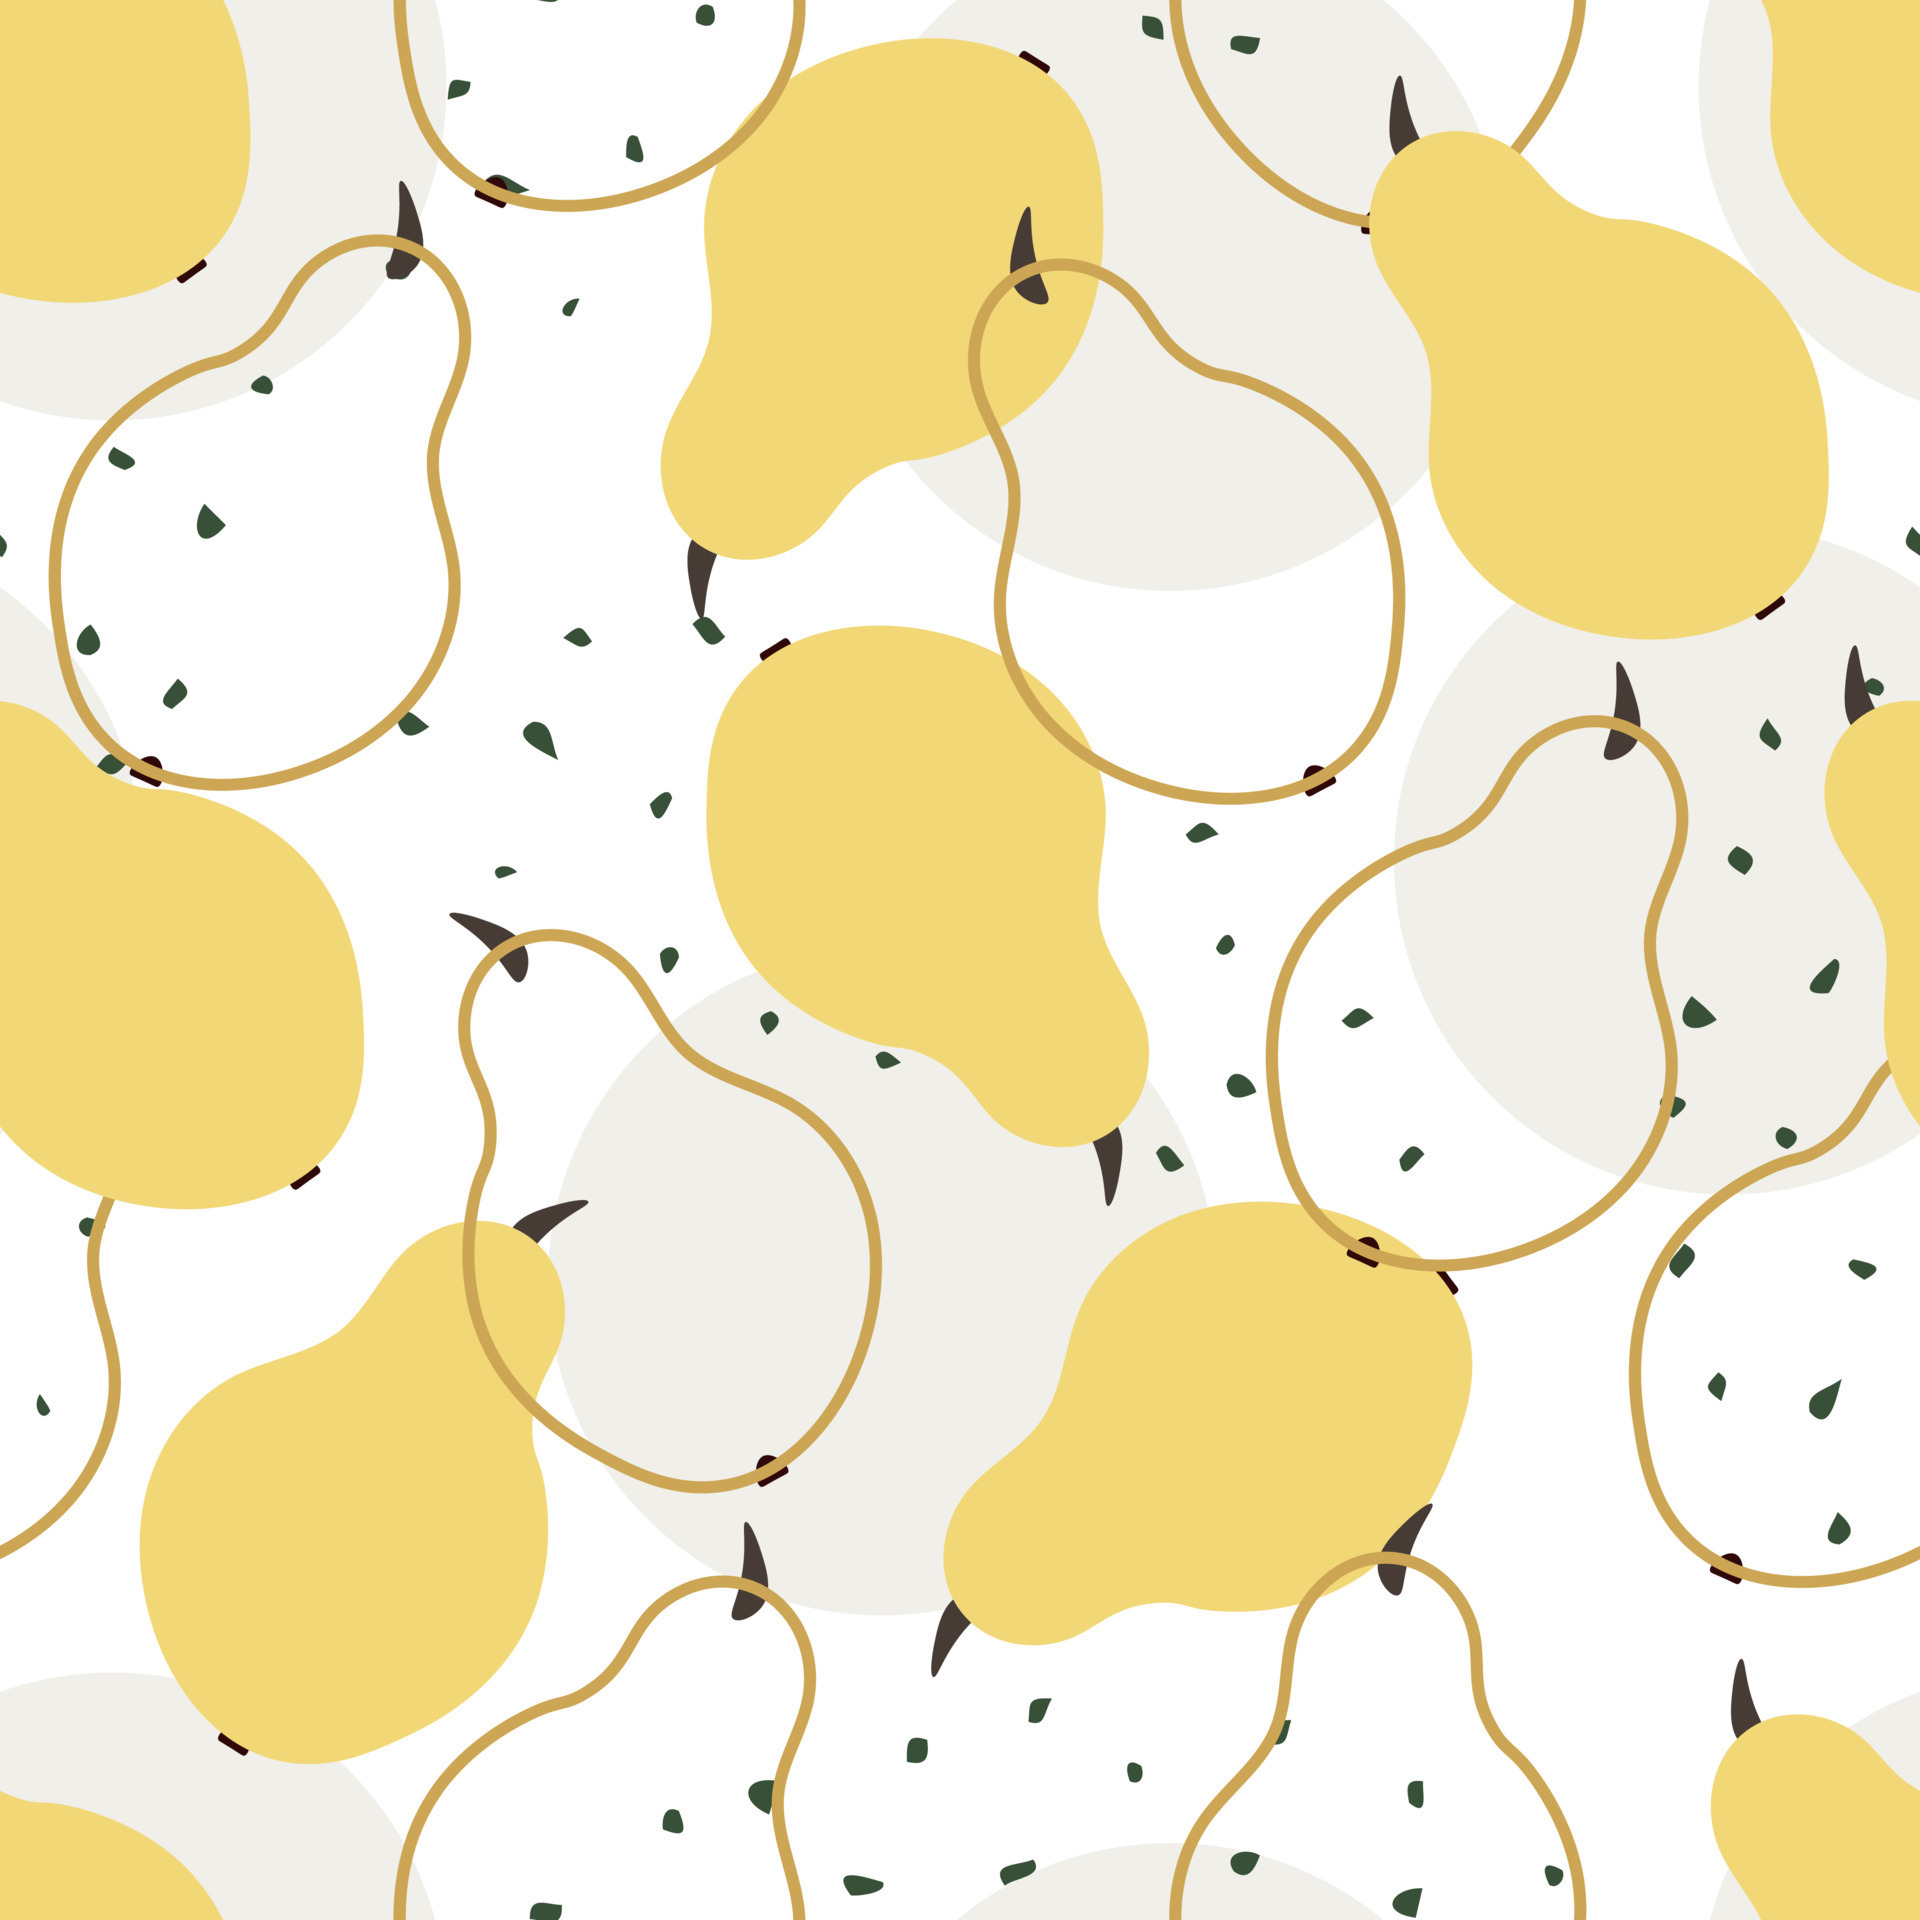 1920x1920 Abstract pear seamless pattern. Background for wallpapers, textiles, papers, fabrics, web pages. Fruit ornament, vintage style. 9213743 Vector Art